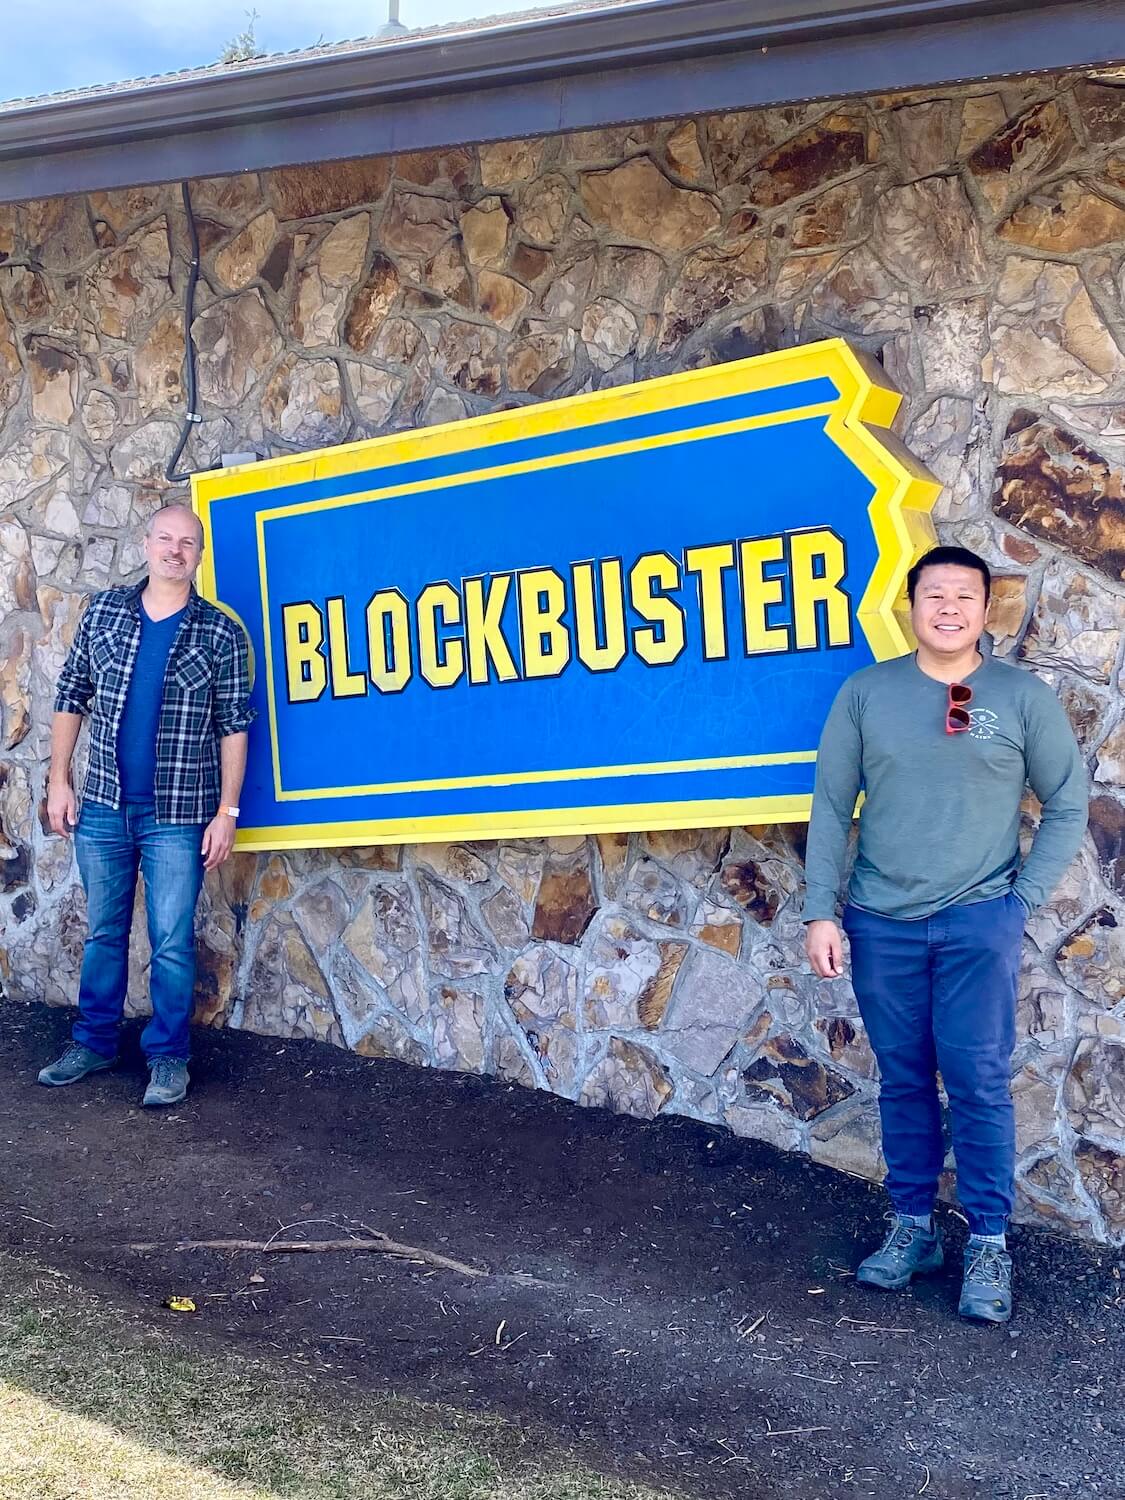 Matthew Kessi and friend stand in front of the last remaining Blockbuster Video franchise, which is in Bend, Oregon.  The large Blockbuster sign shows bright yellow lettering and blue fill in of the giant ticket stub on a brick patchwork wall. 